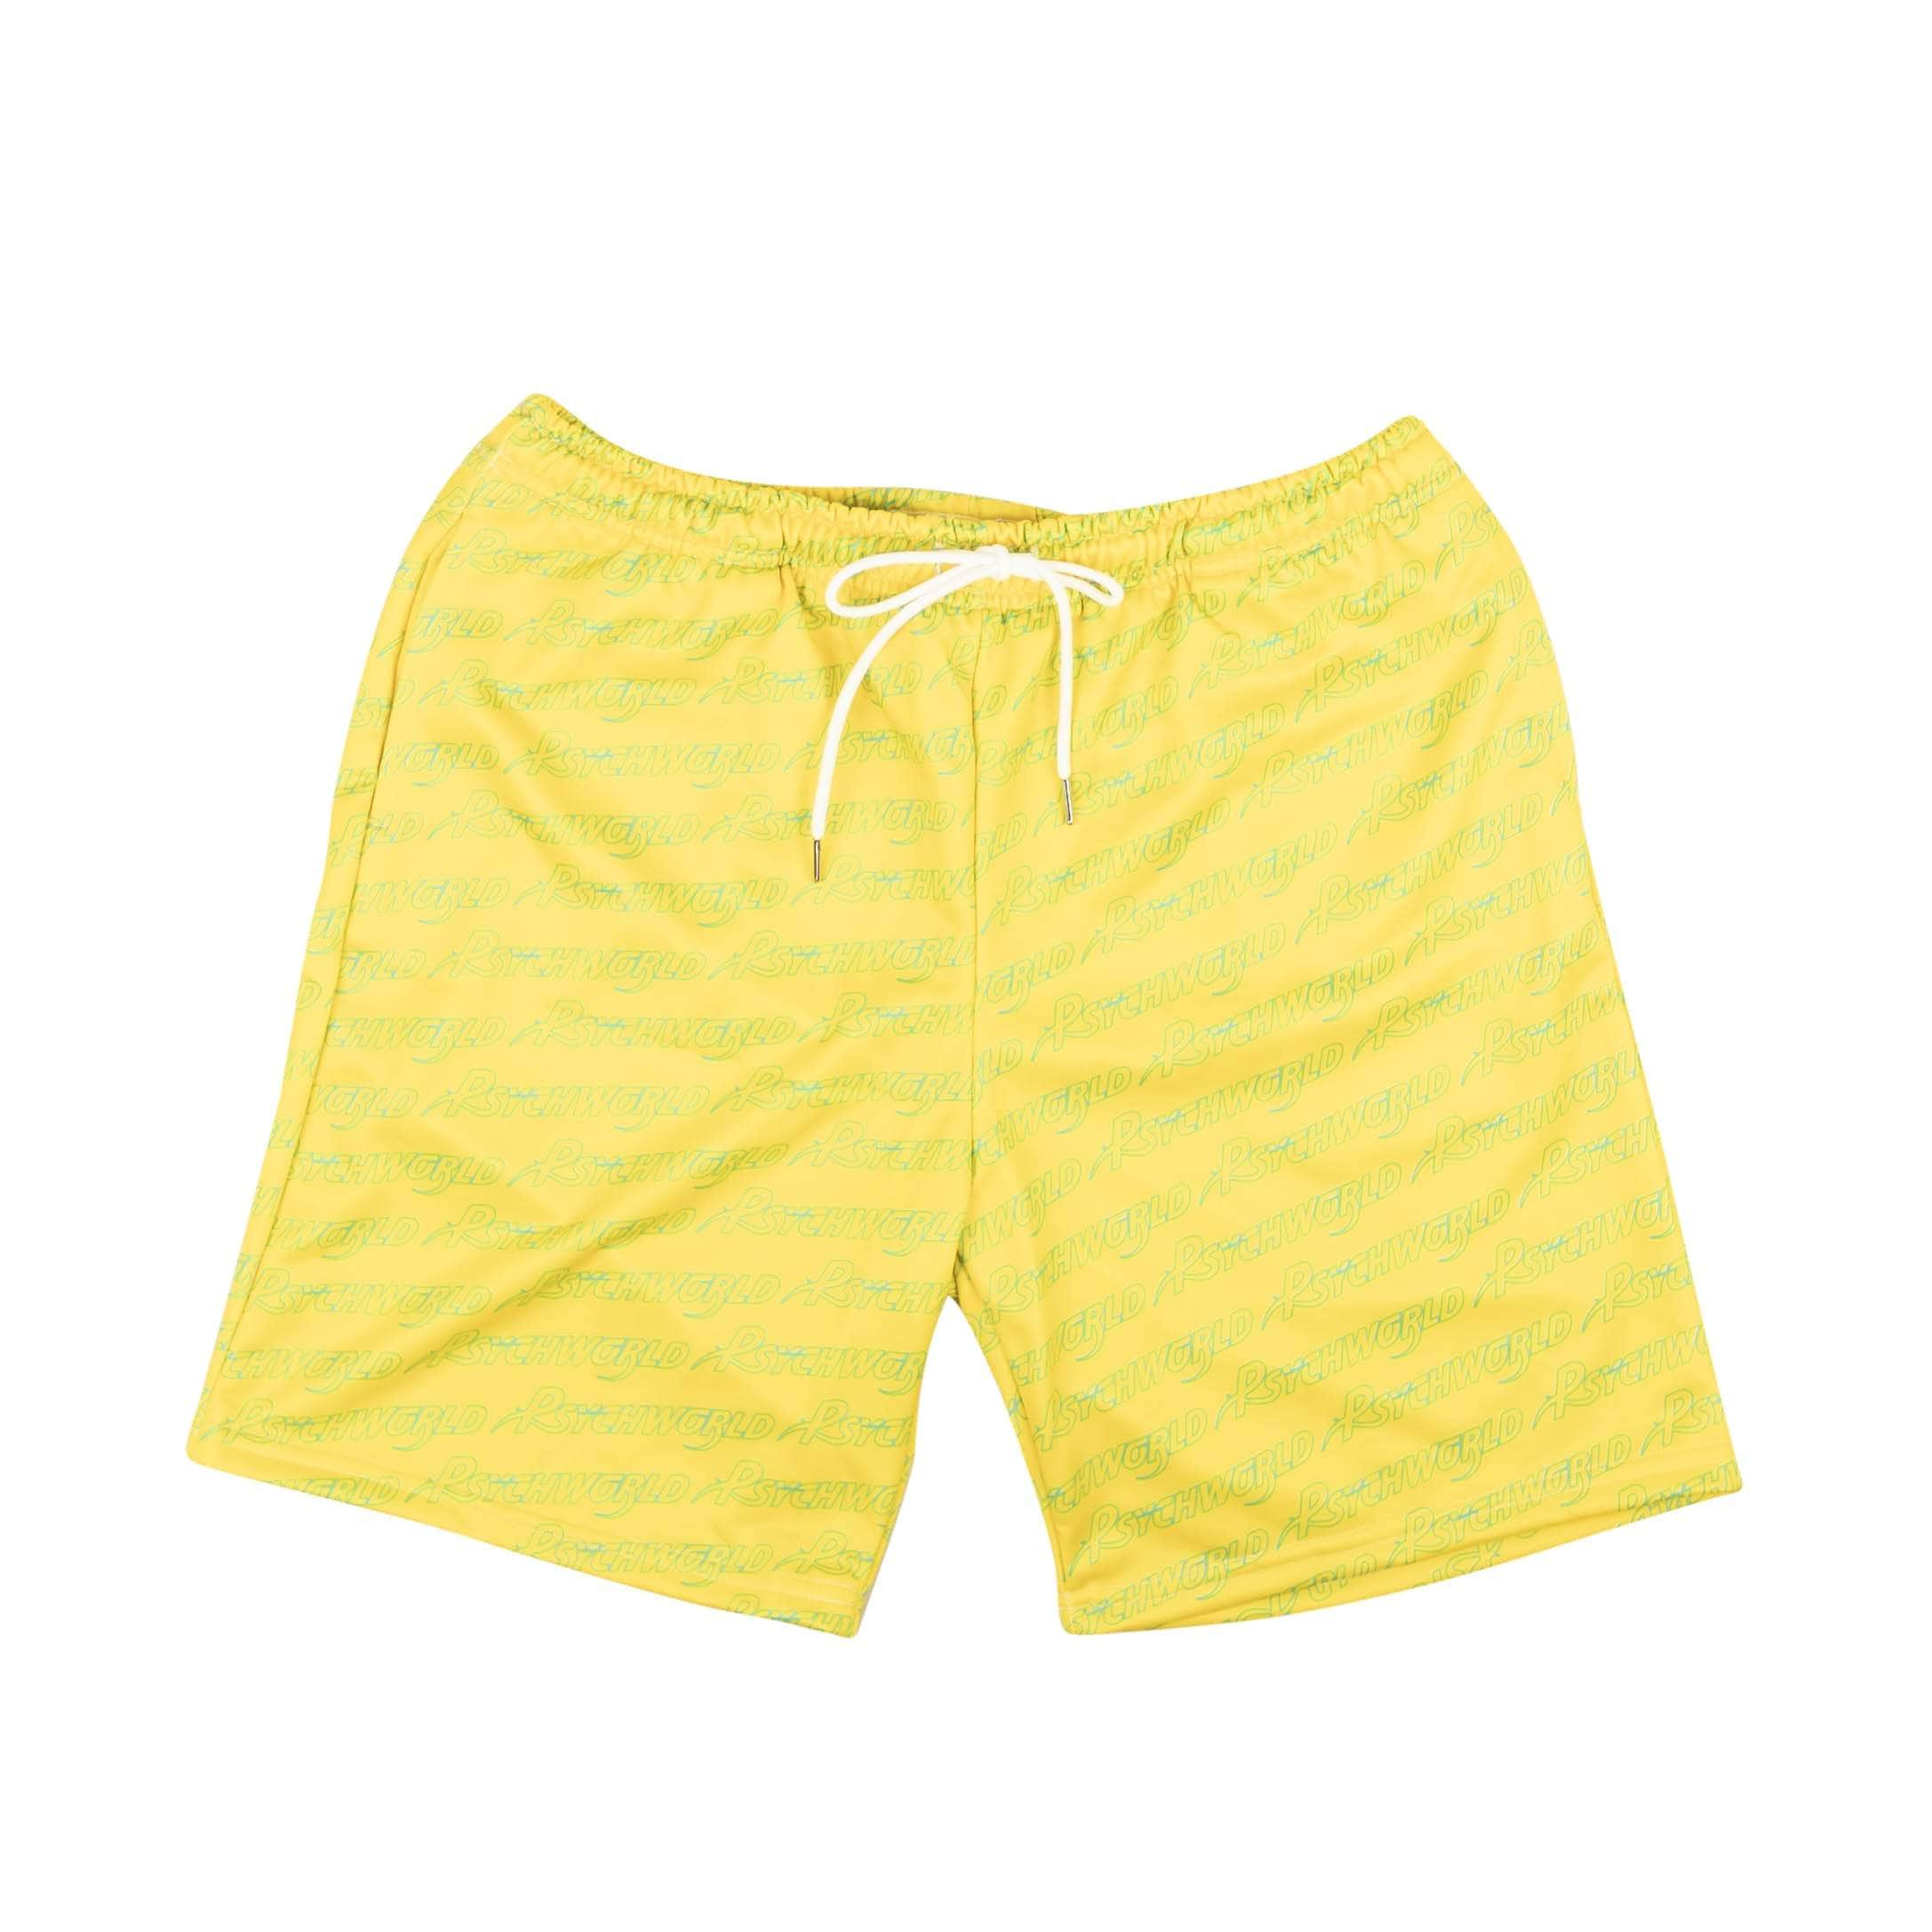 Psychworld channelenable-all, chicmi, couponcollection, gender-mens, main-clothing, mens-shoes, MixedApparel, psychworld, size-s, SPO, under-250 S / PSYCHWORLD_REPEATED_LOGO_SHORTS_YELLOW_TEAL 95-PSY-1016/S PSYCHWORLD_REPEATED_LOGO_SHORTS_YELLOW_TEAL YELLOW/TEAL PSYCHWORLD REPEATED LOGO SHORTS 95-PSY-1016/S 95-PSY-1016/S